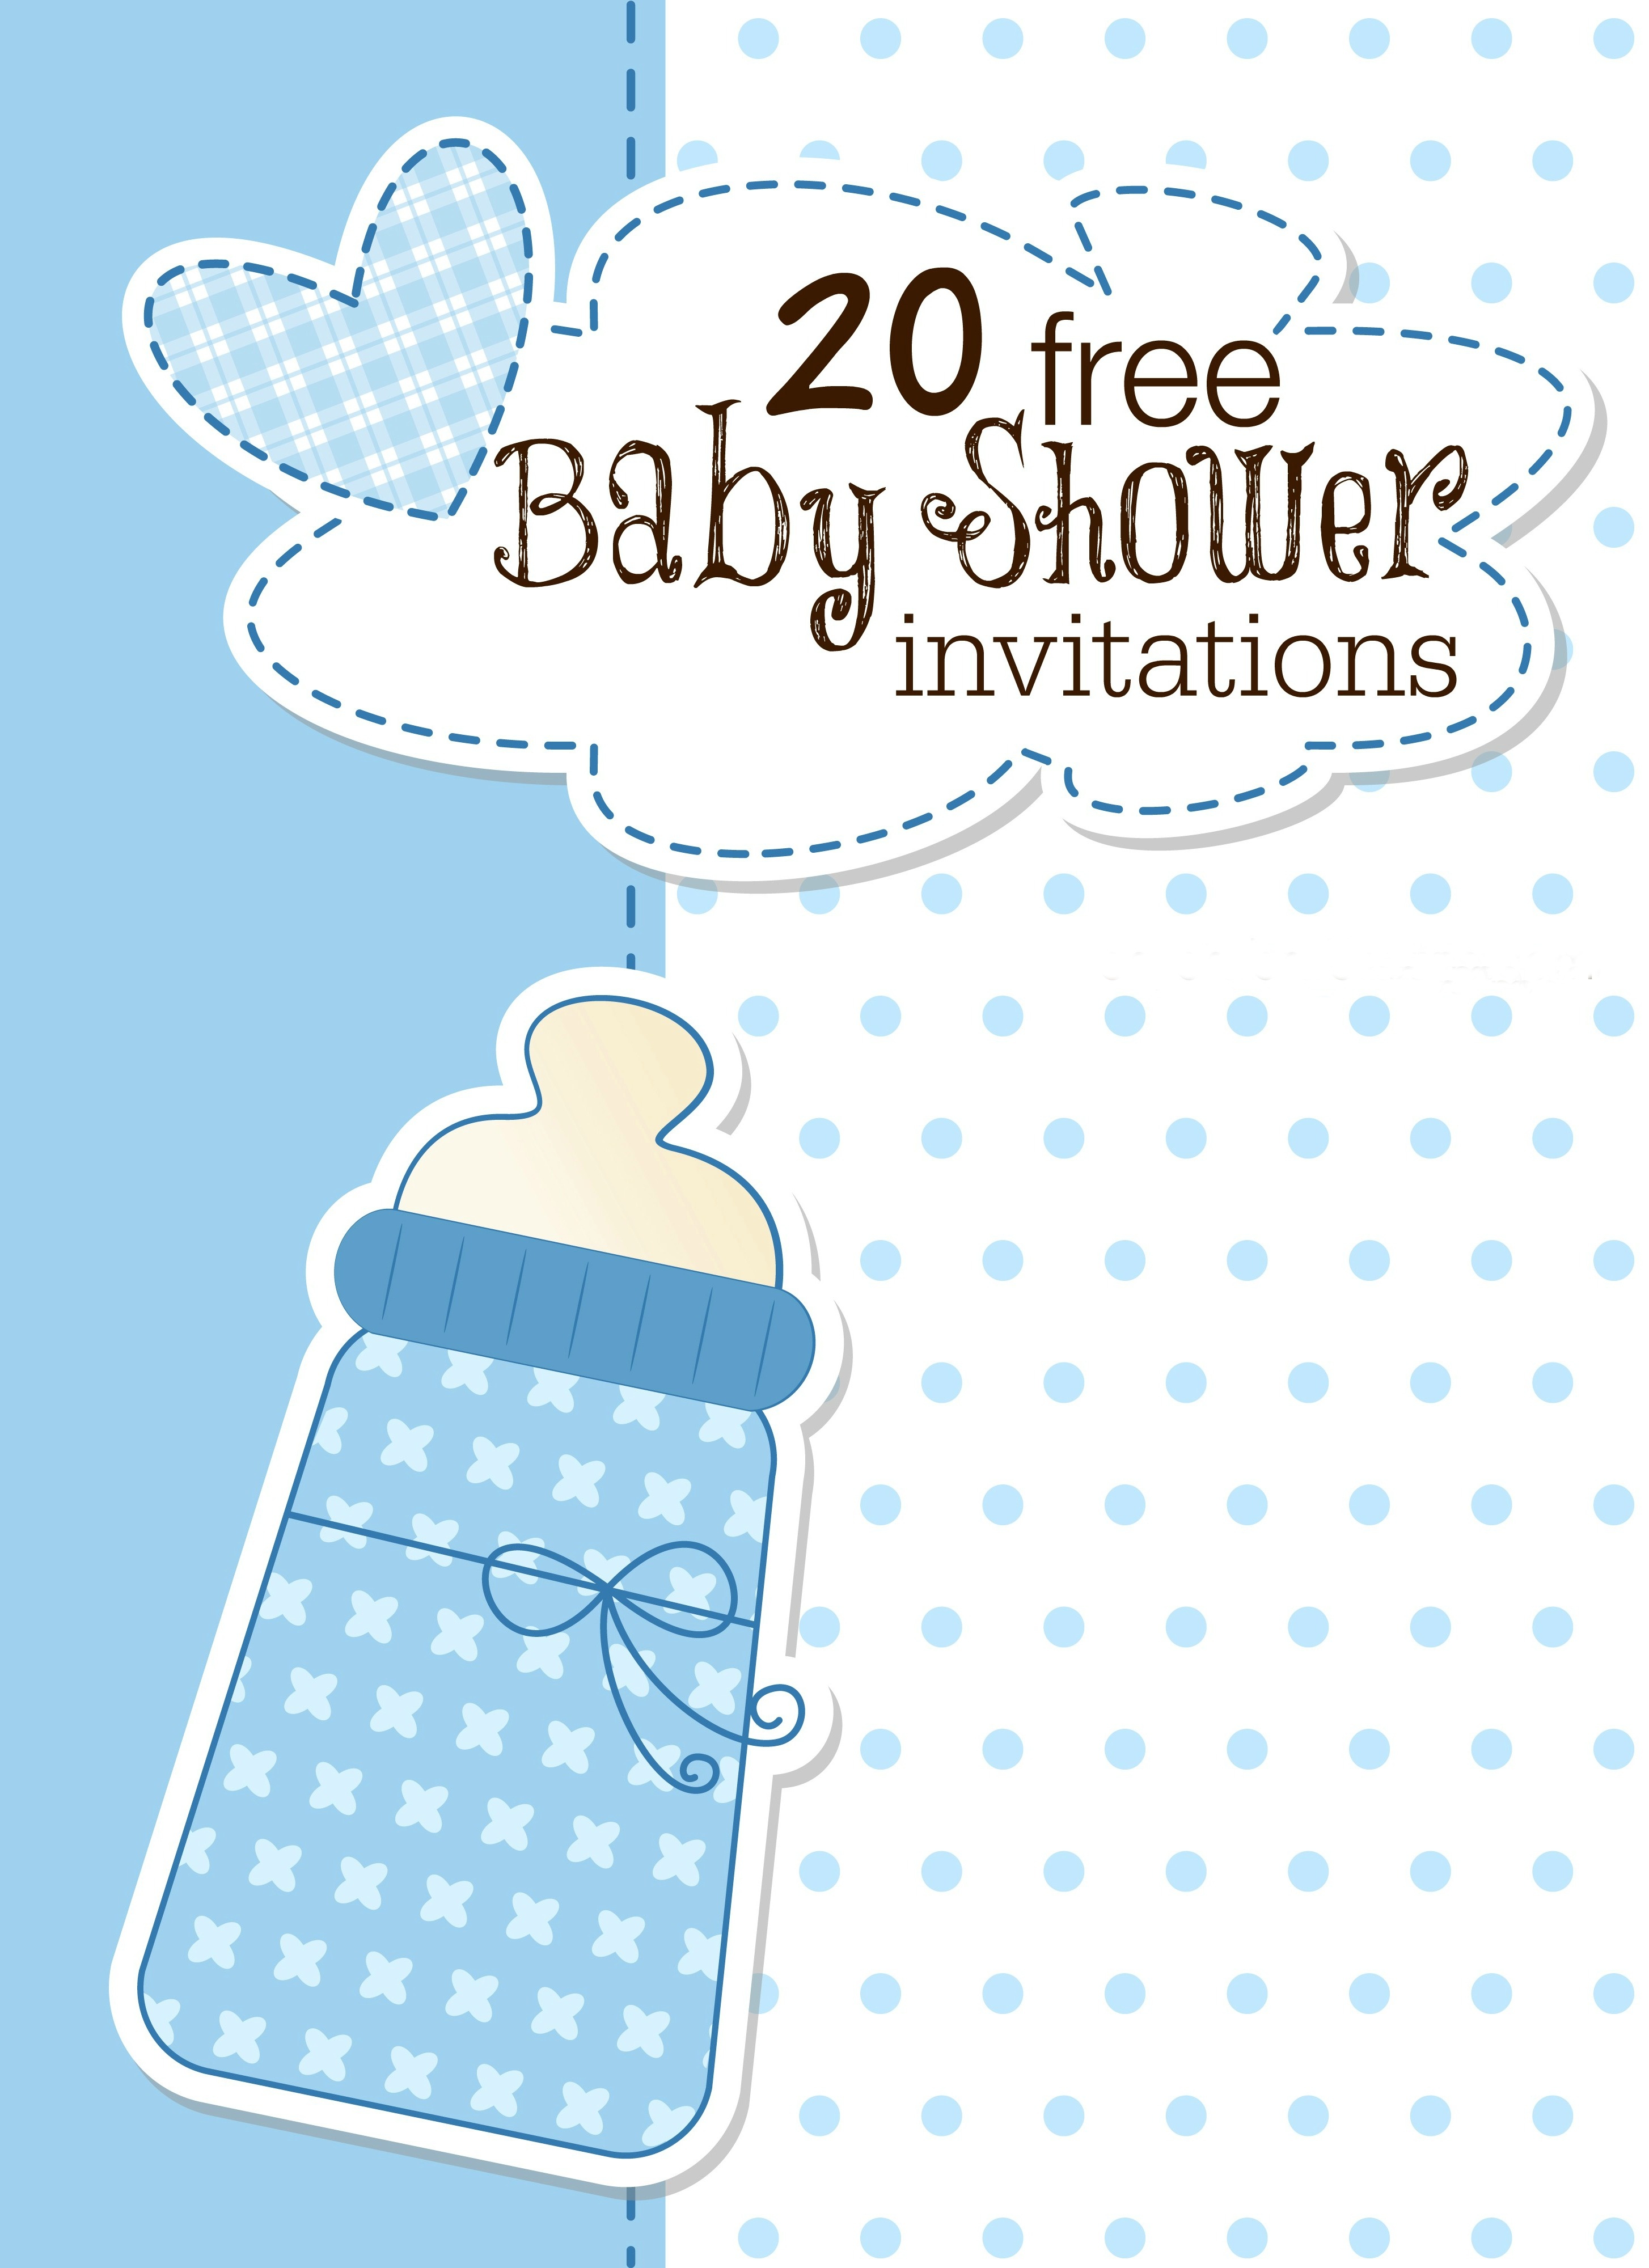 Printable Baby Shower Invitations - Free Baby Boy Shower Invitations Printable